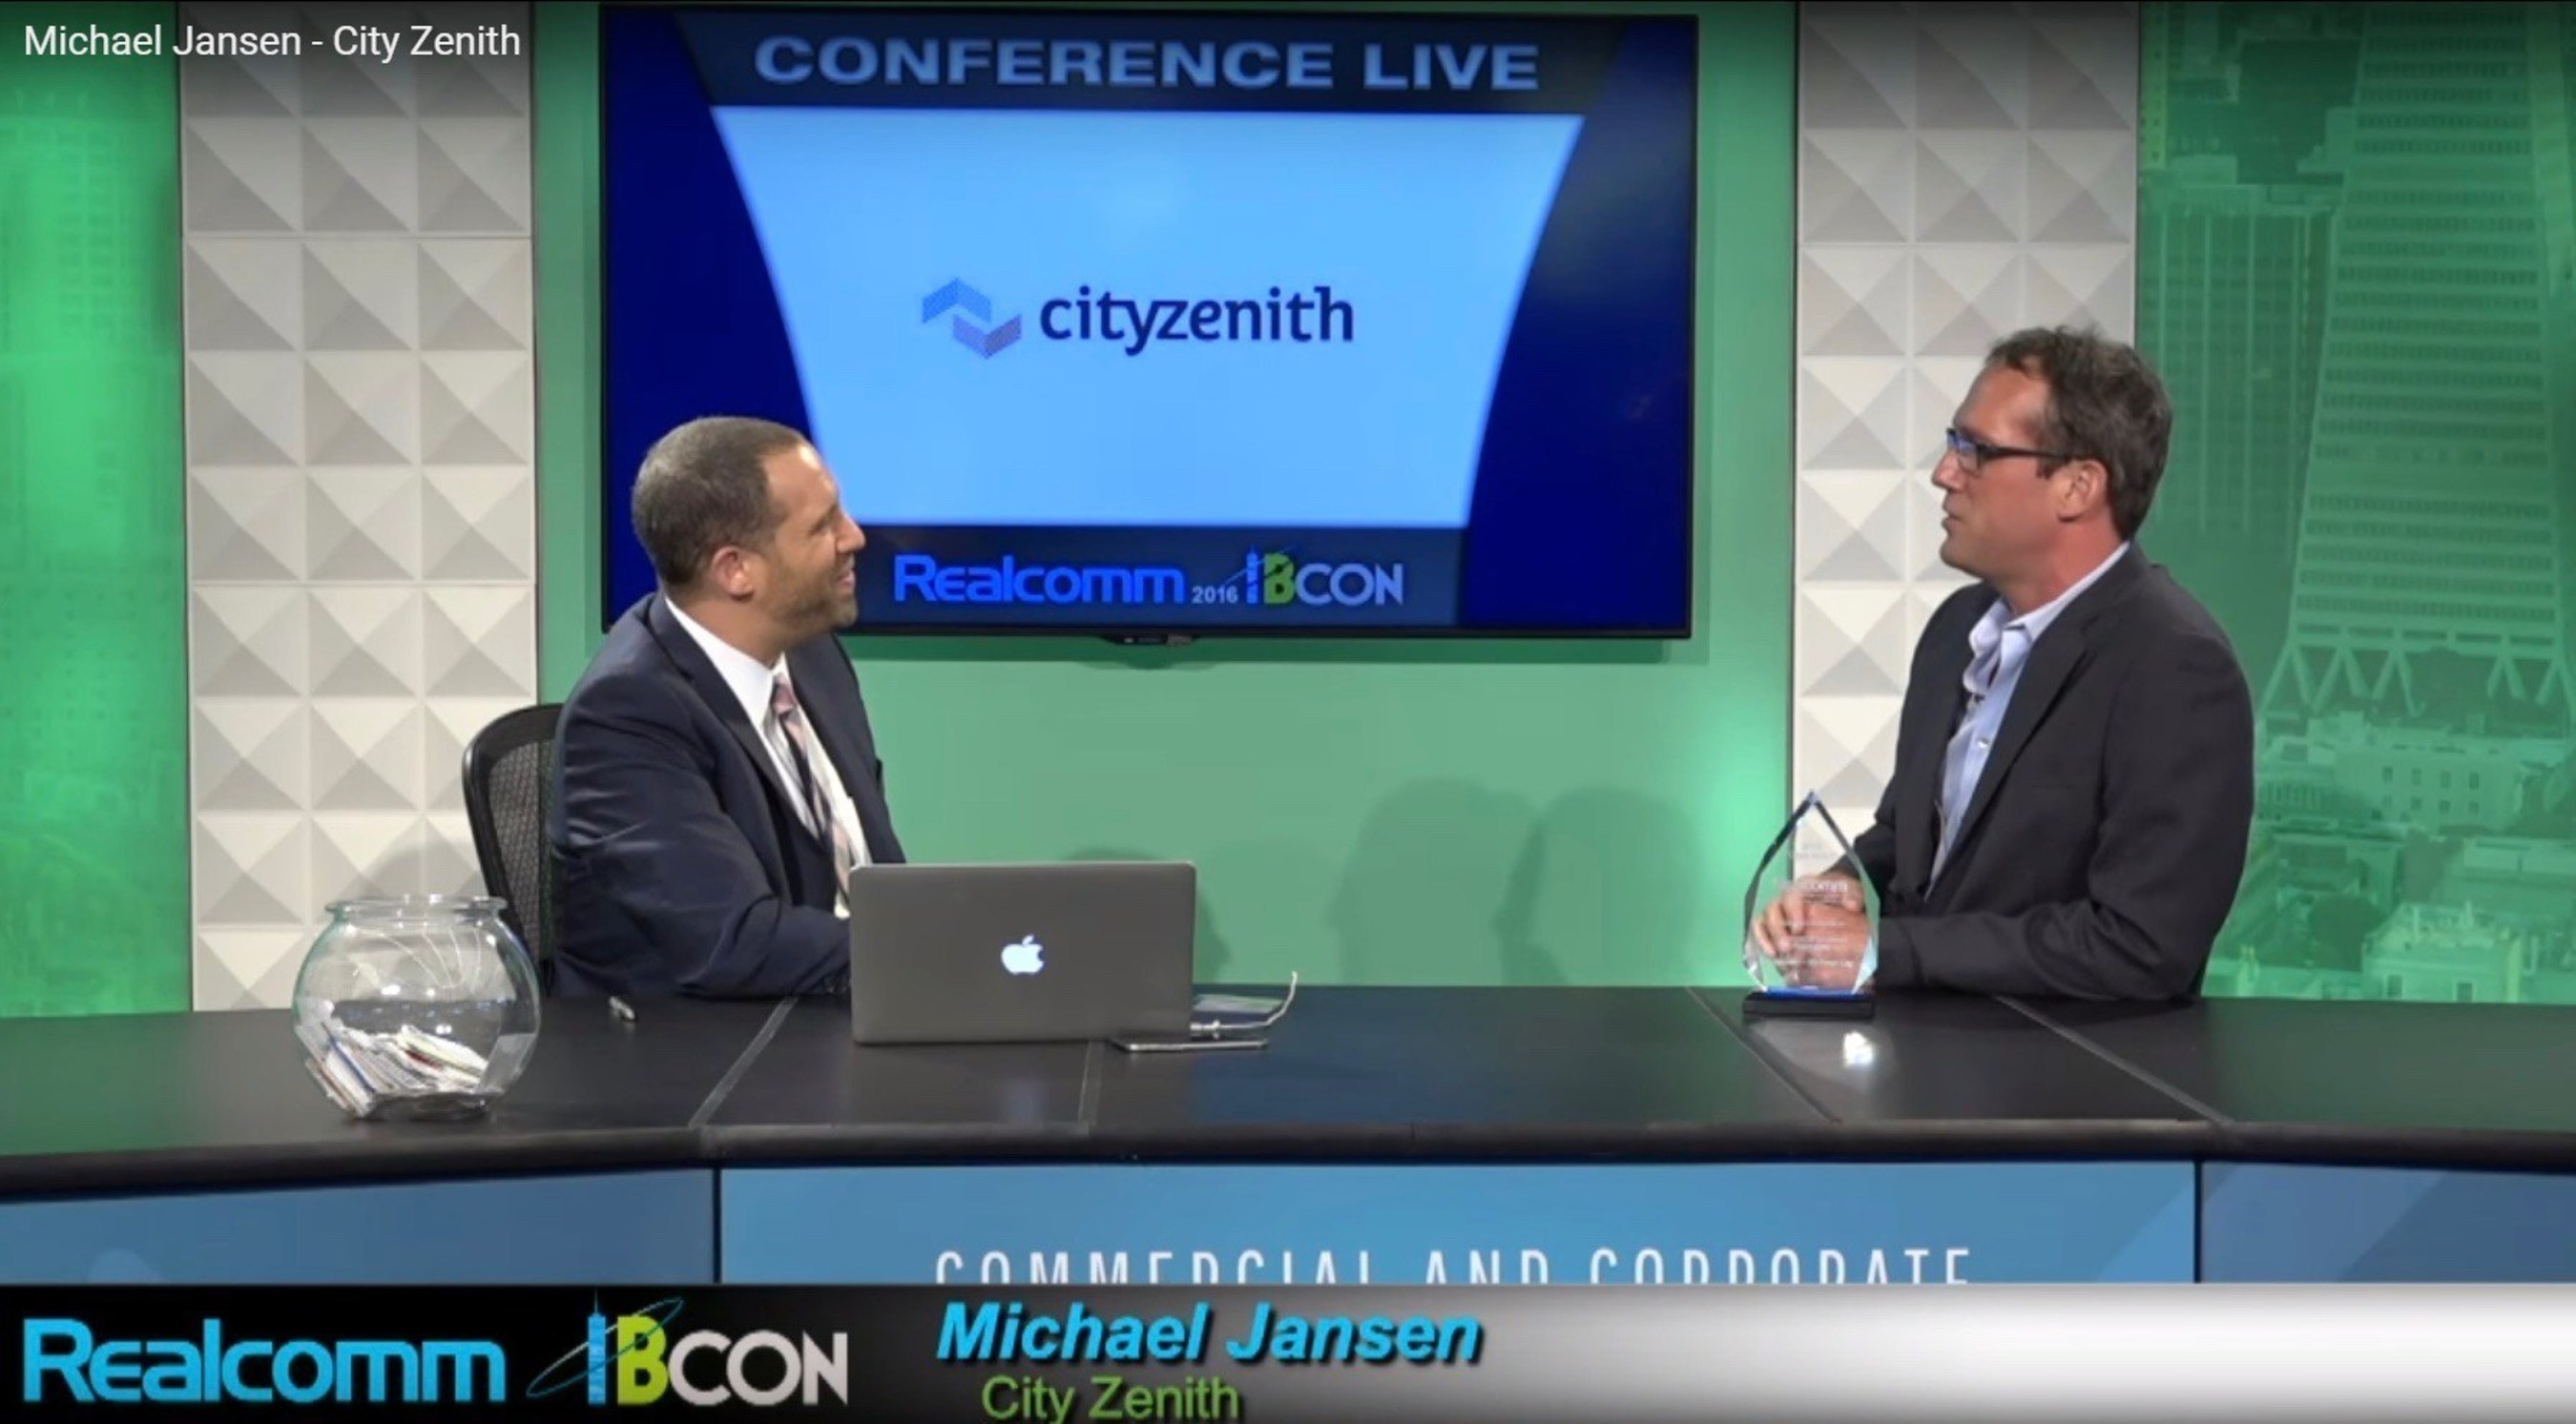 The after award interview on Realcom Live with Cityzenith CEO Michael Jansen.